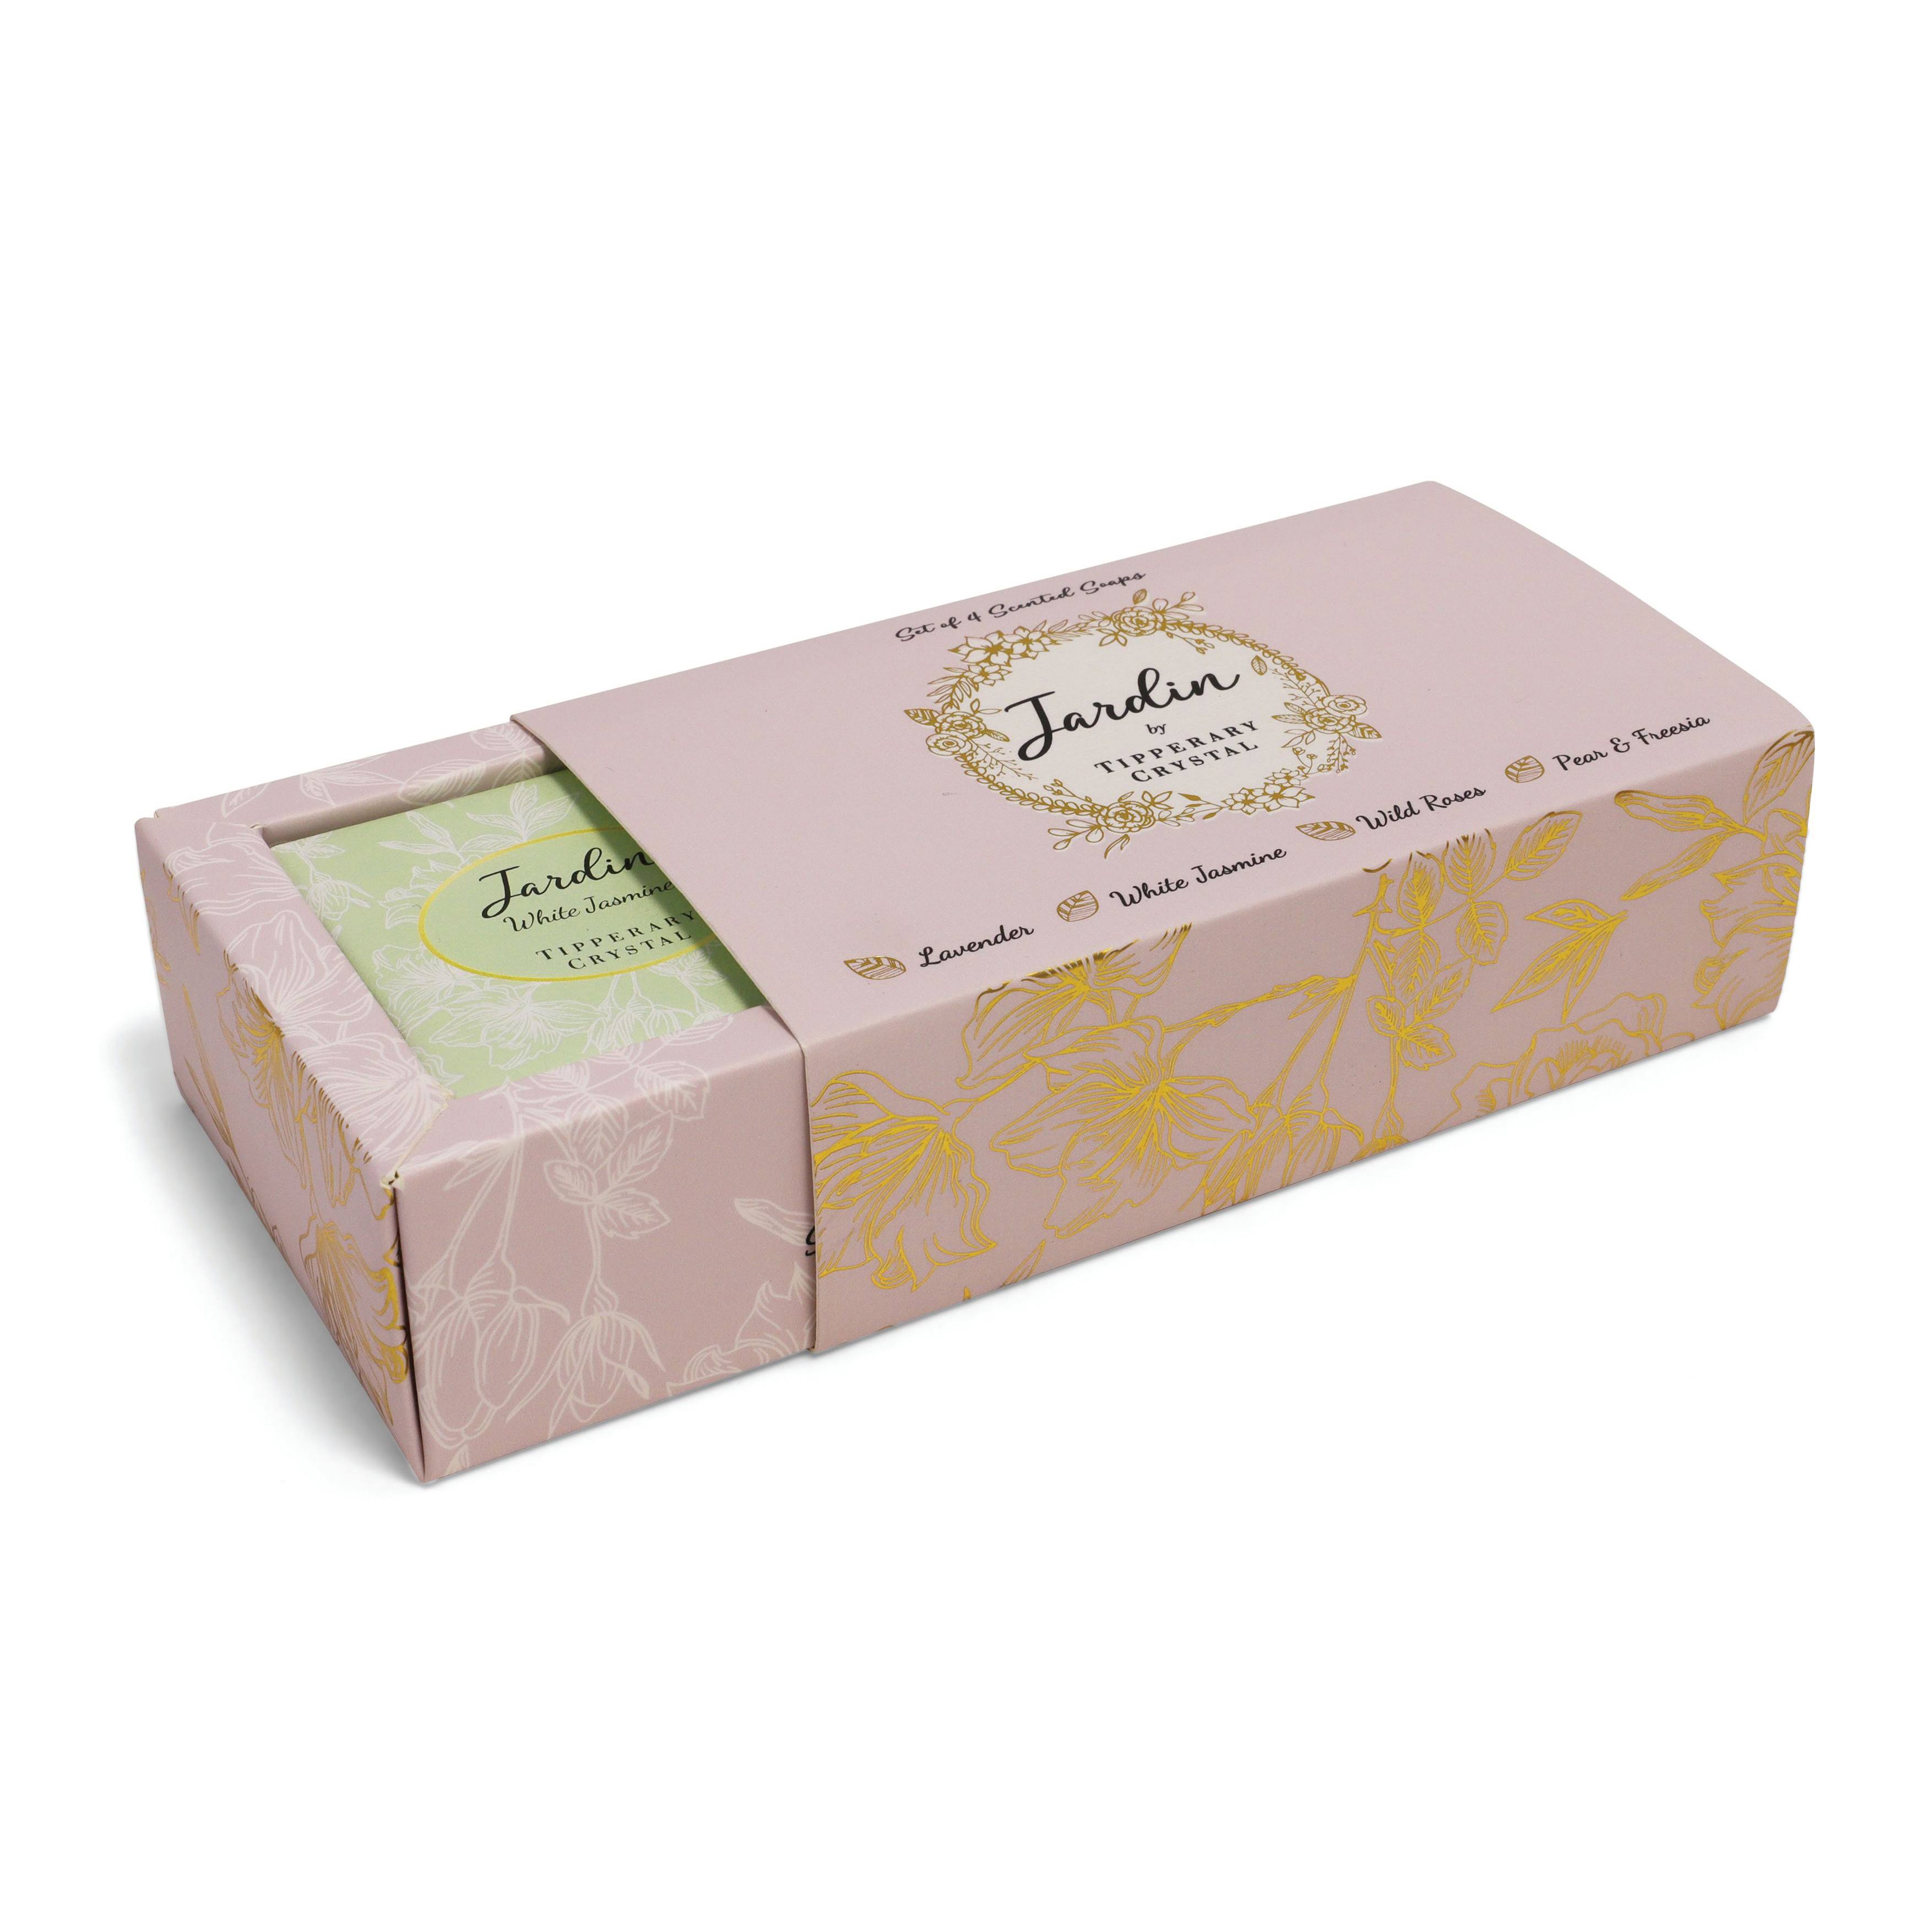 Tipperary Crystal Jardin Set of 4 Scented Soaps